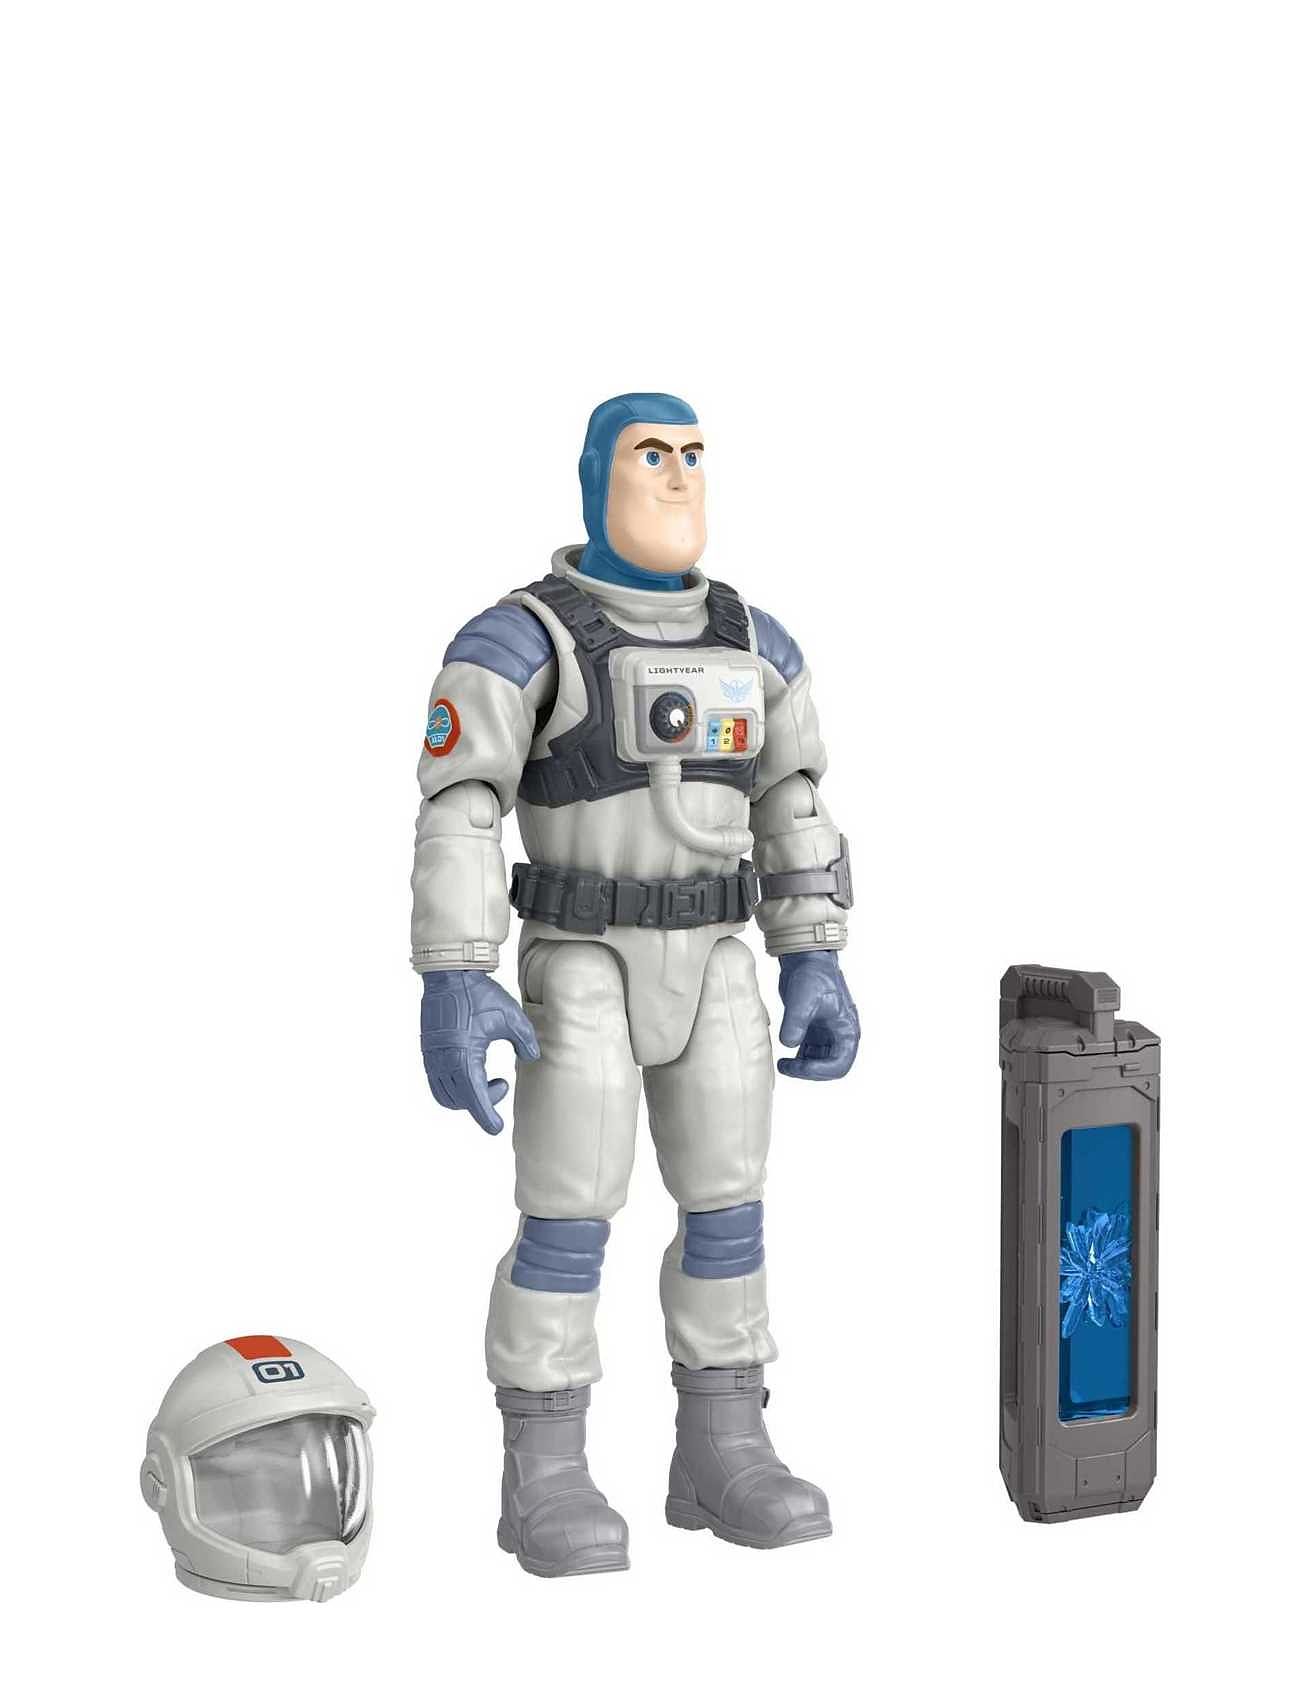 Lightyear Disney Pixar Xl-01 Buzz Figure Toys Playsets & Action Figures Movies & Fairy Tale Characters Multi/patterned Toy Story